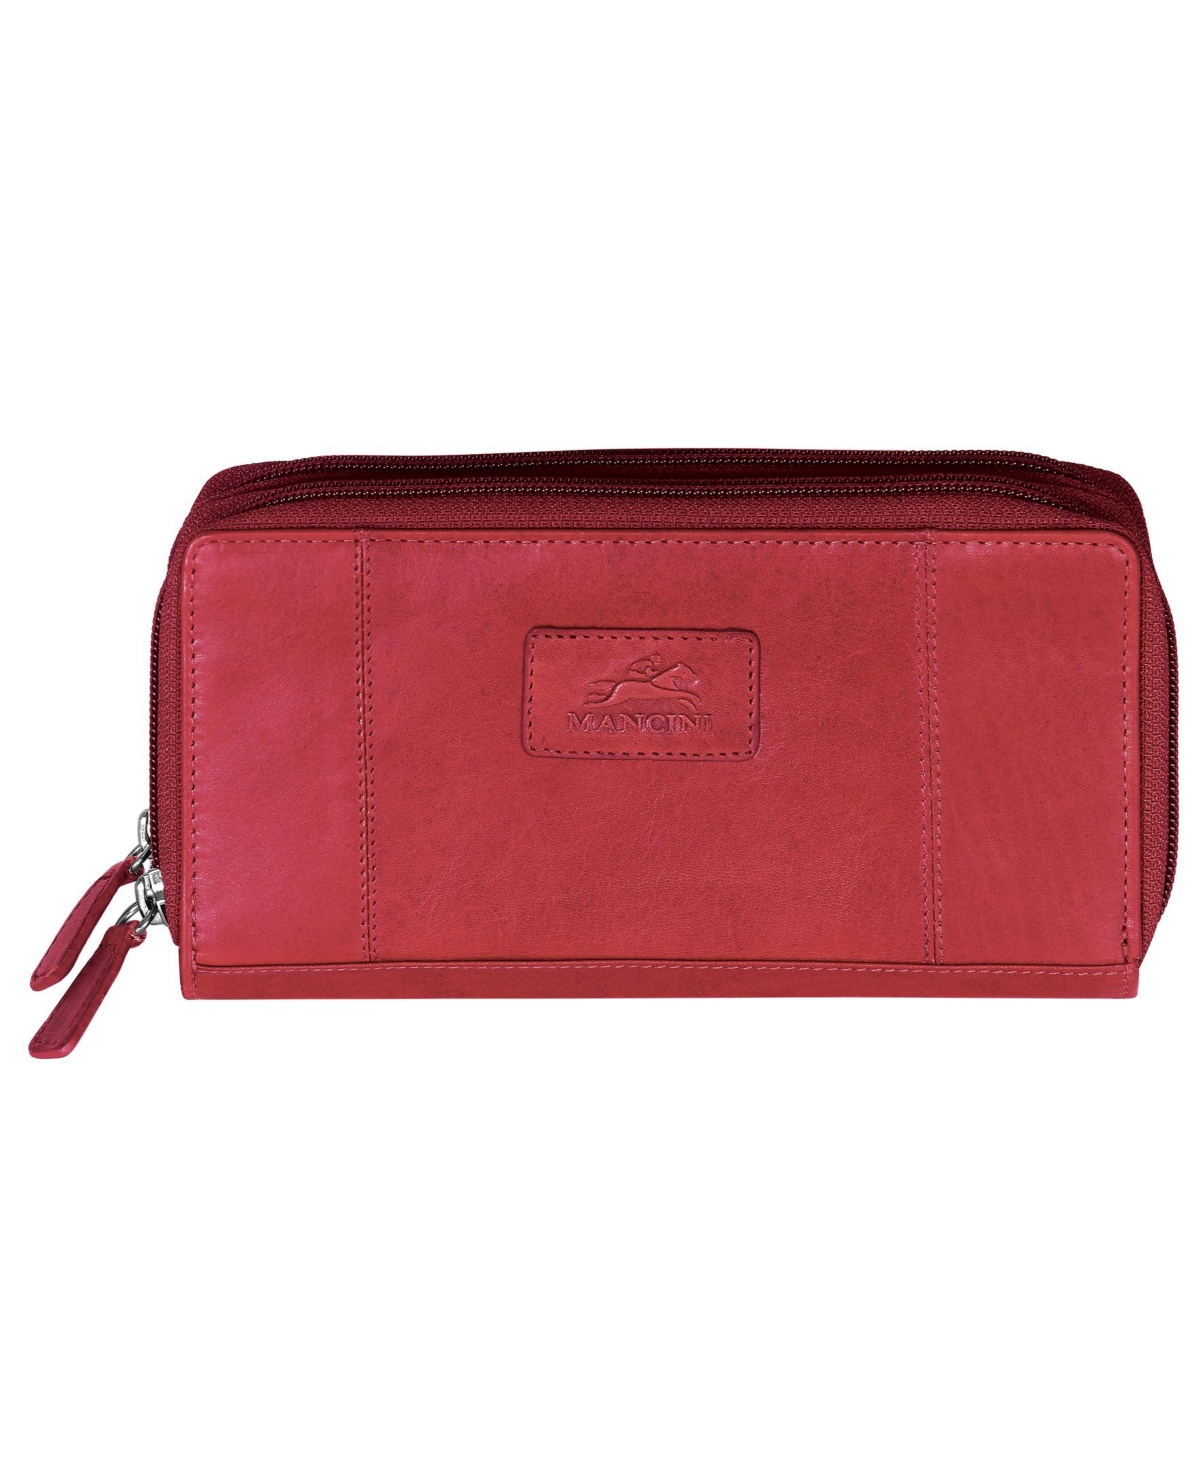 Casablanca Collection Rfid Secure Double Zipper Wallet - Red